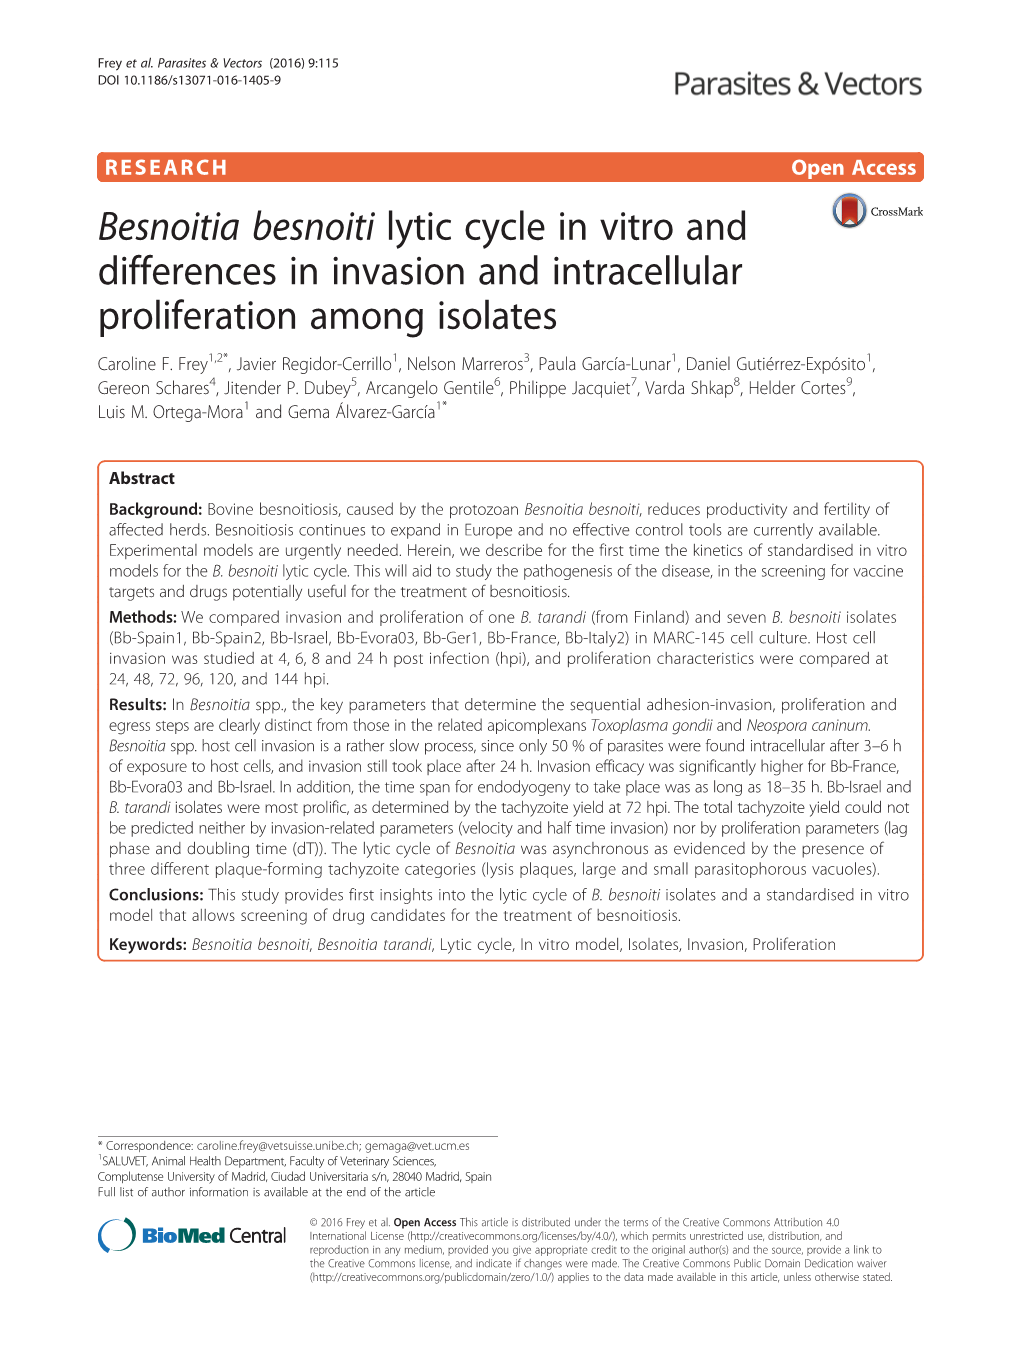 Besnoitia Besnoiti Lytic Cycle in Vitro and Differences in Invasion and Intracellular Proliferation Among Isolates Caroline F